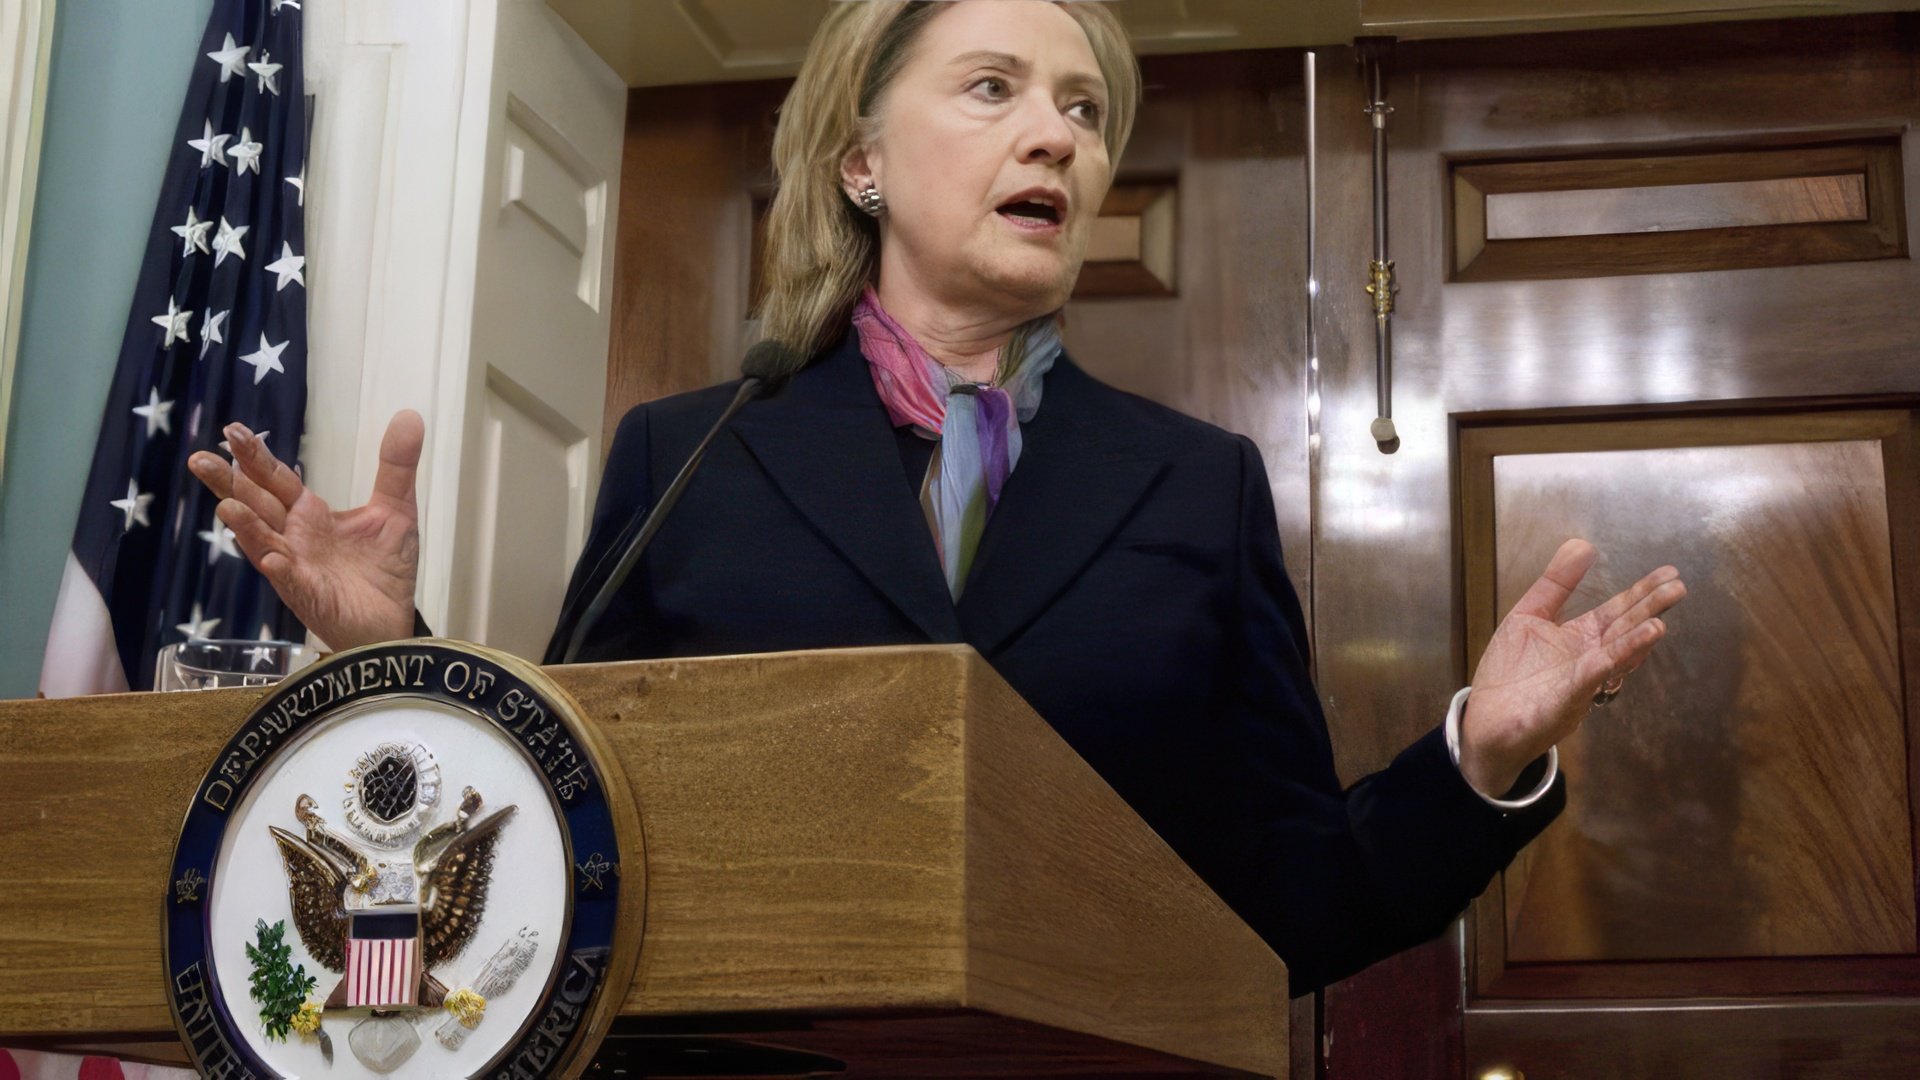 Hillary Clinton Served as the United States Secretary of State